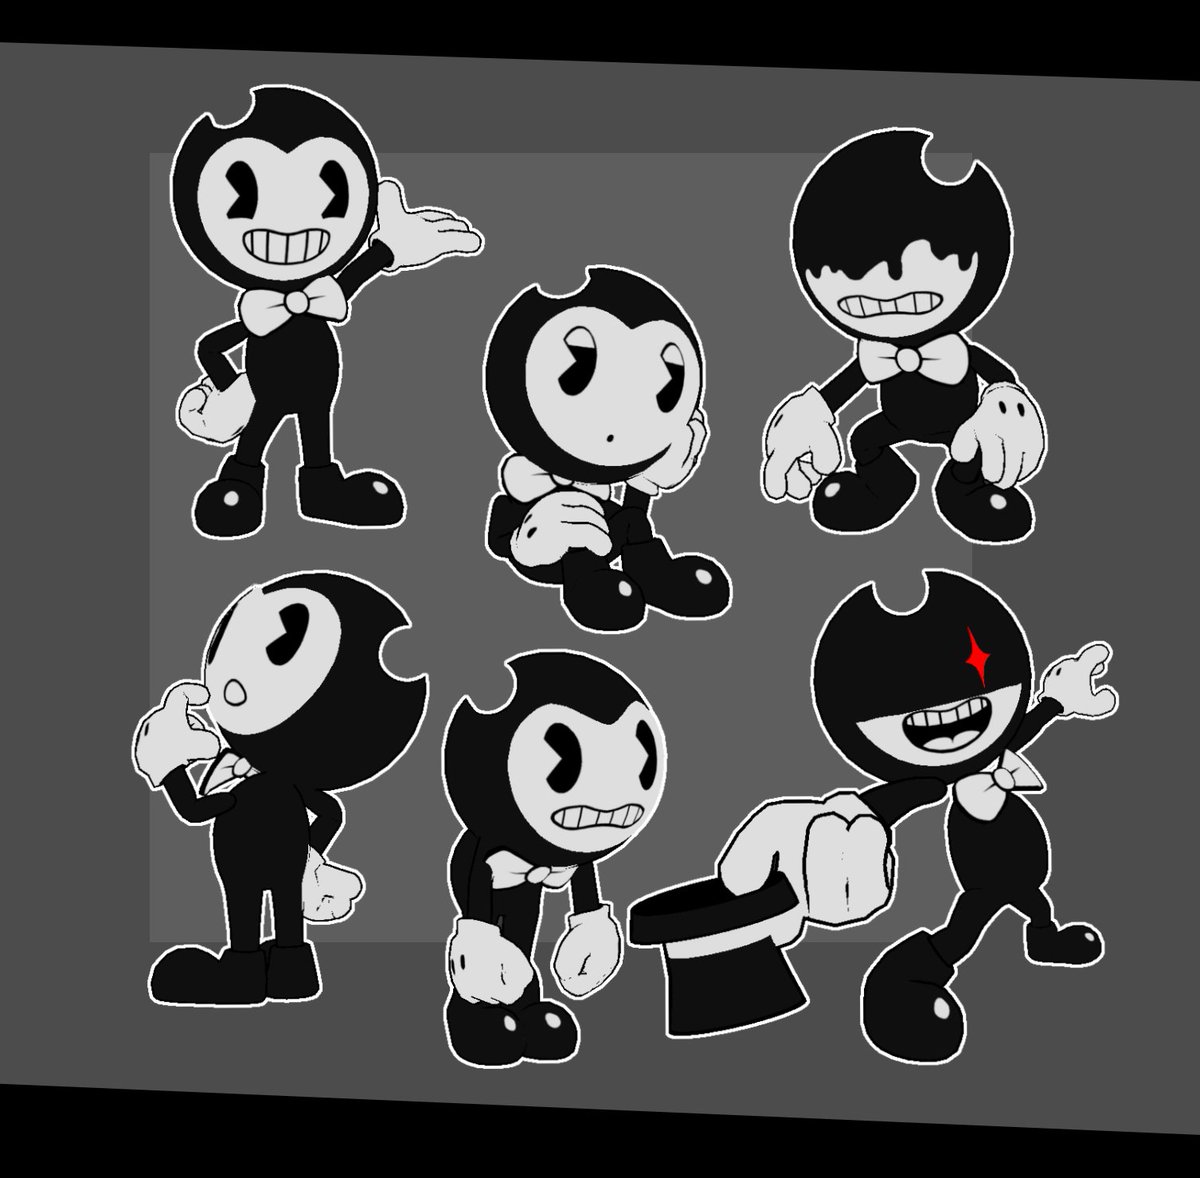 Totally forgot I had this toon Bendy model I made back in 2021... I don't think I ever showed it off!

#BENDY #BENDYMOVIE